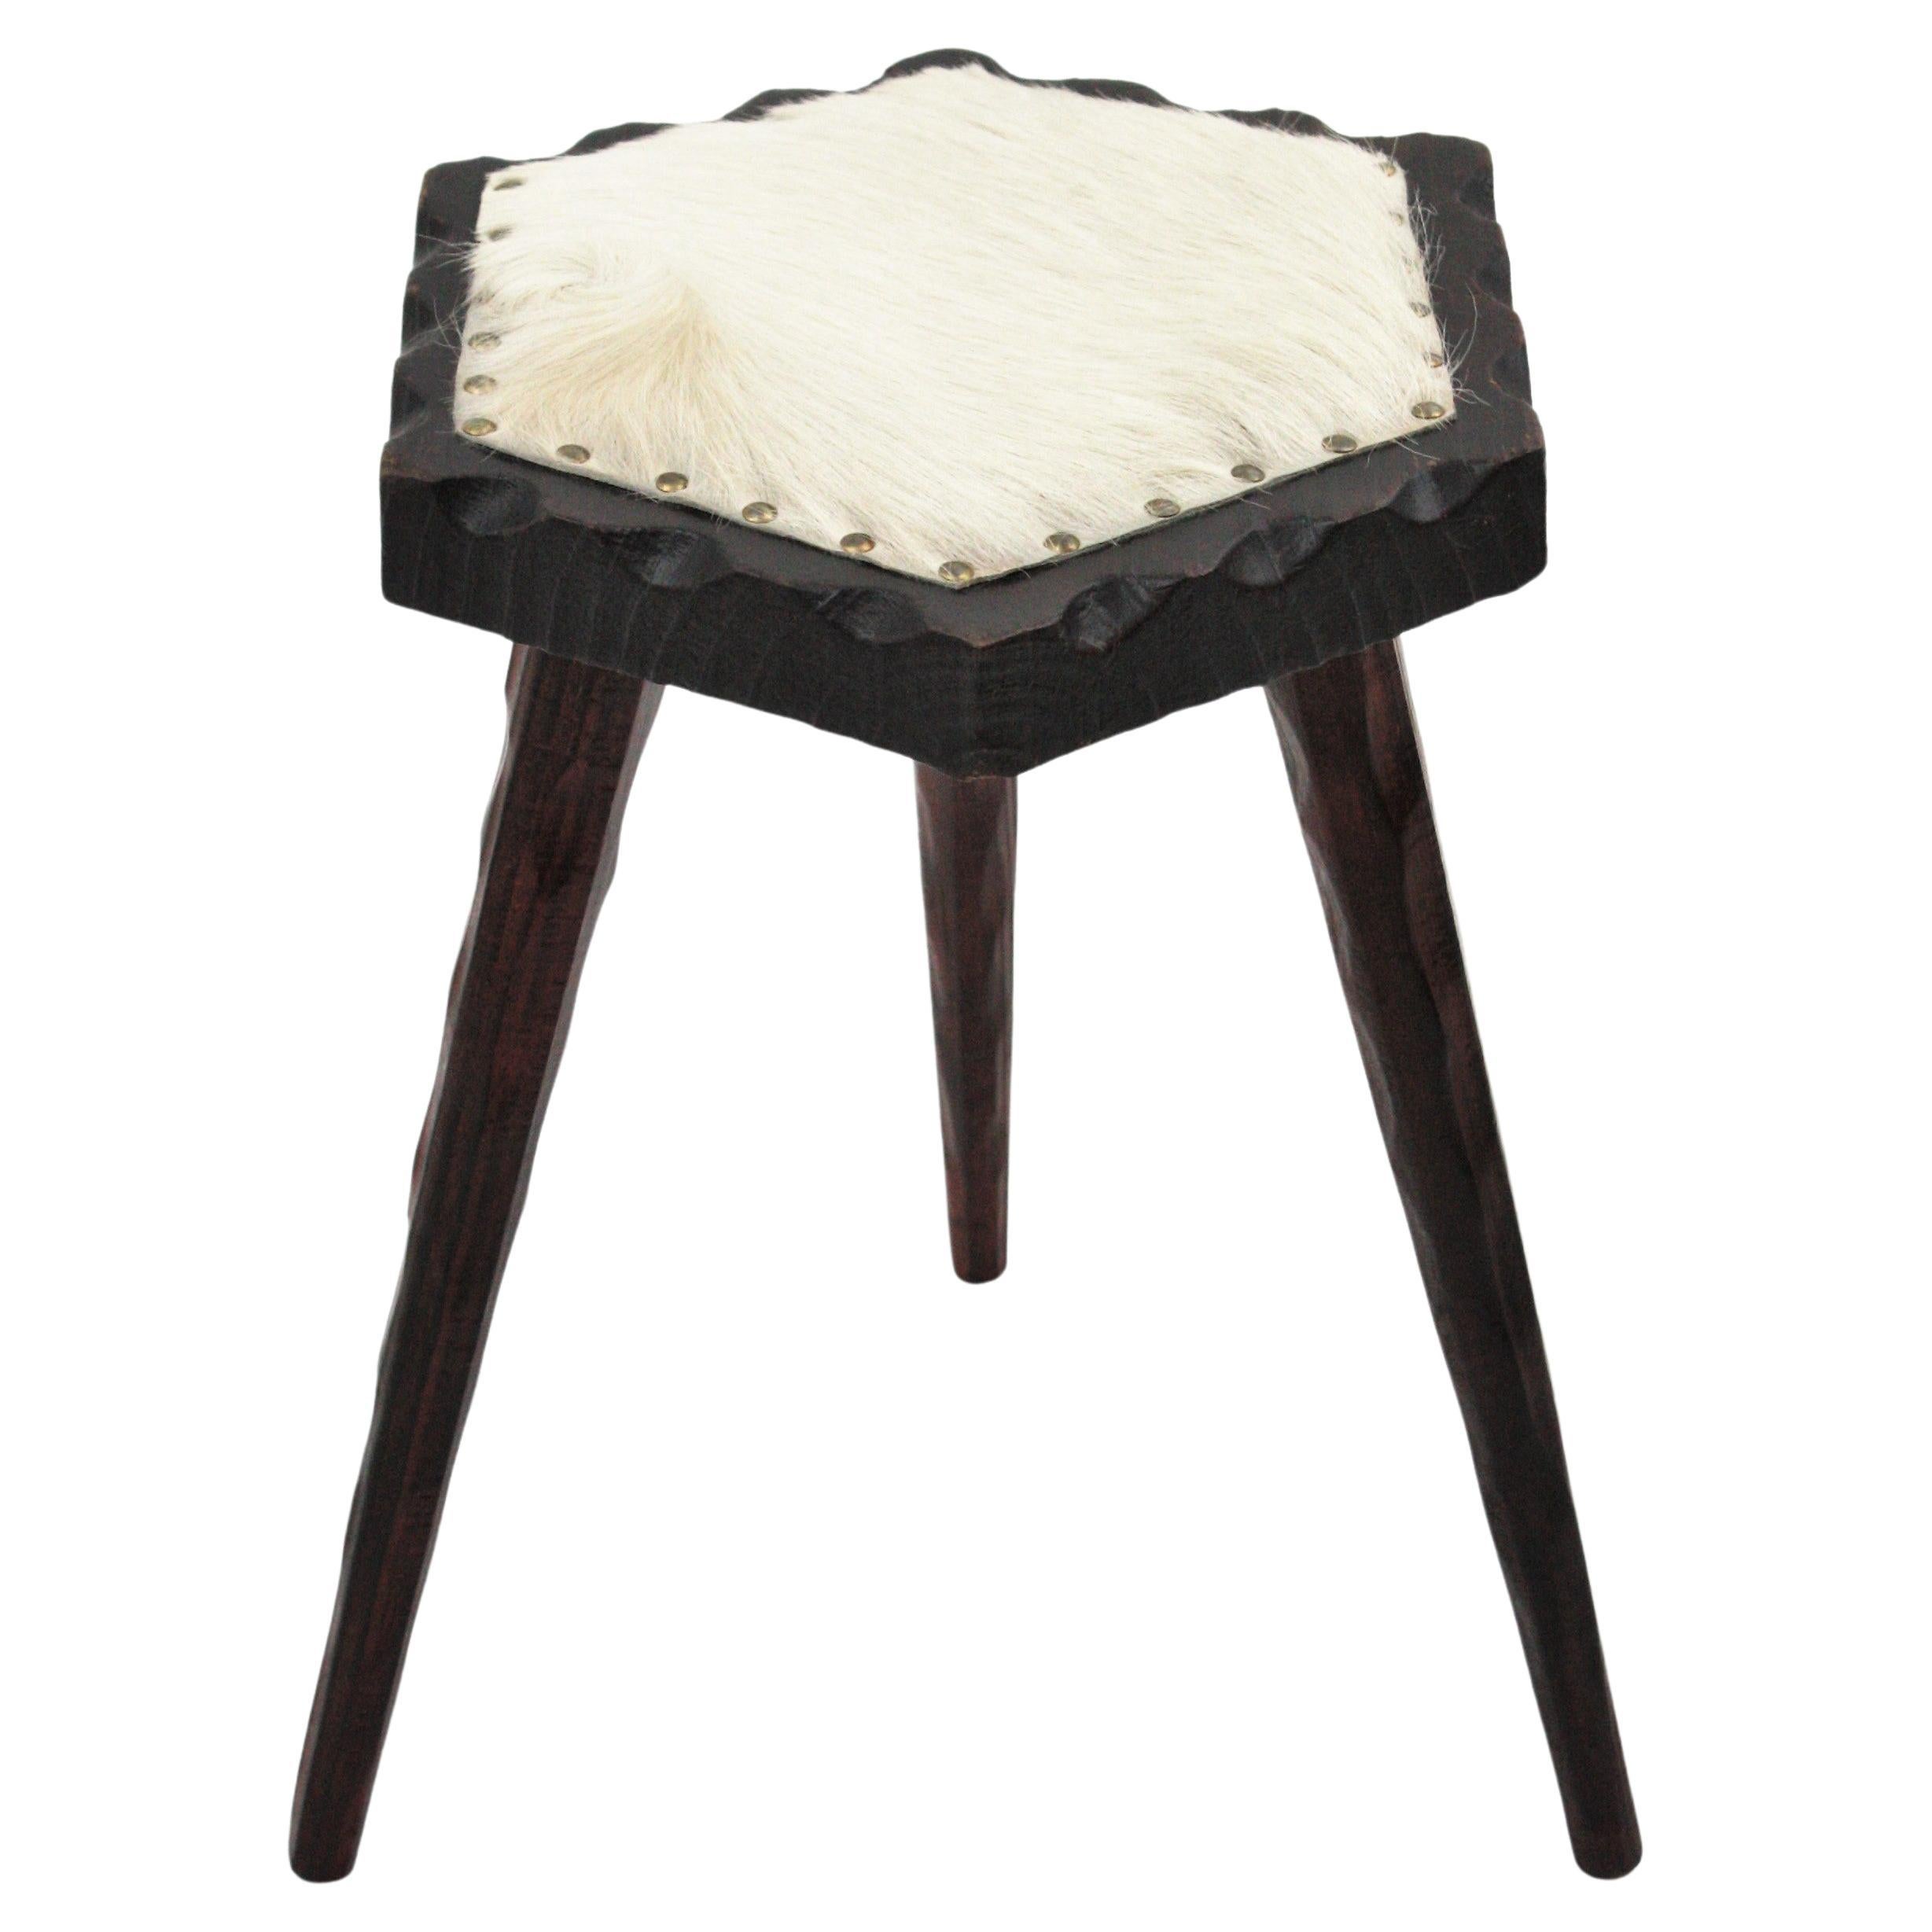 Spanish Colonial Hexagonal Tripod Stool in Wood and Fur 